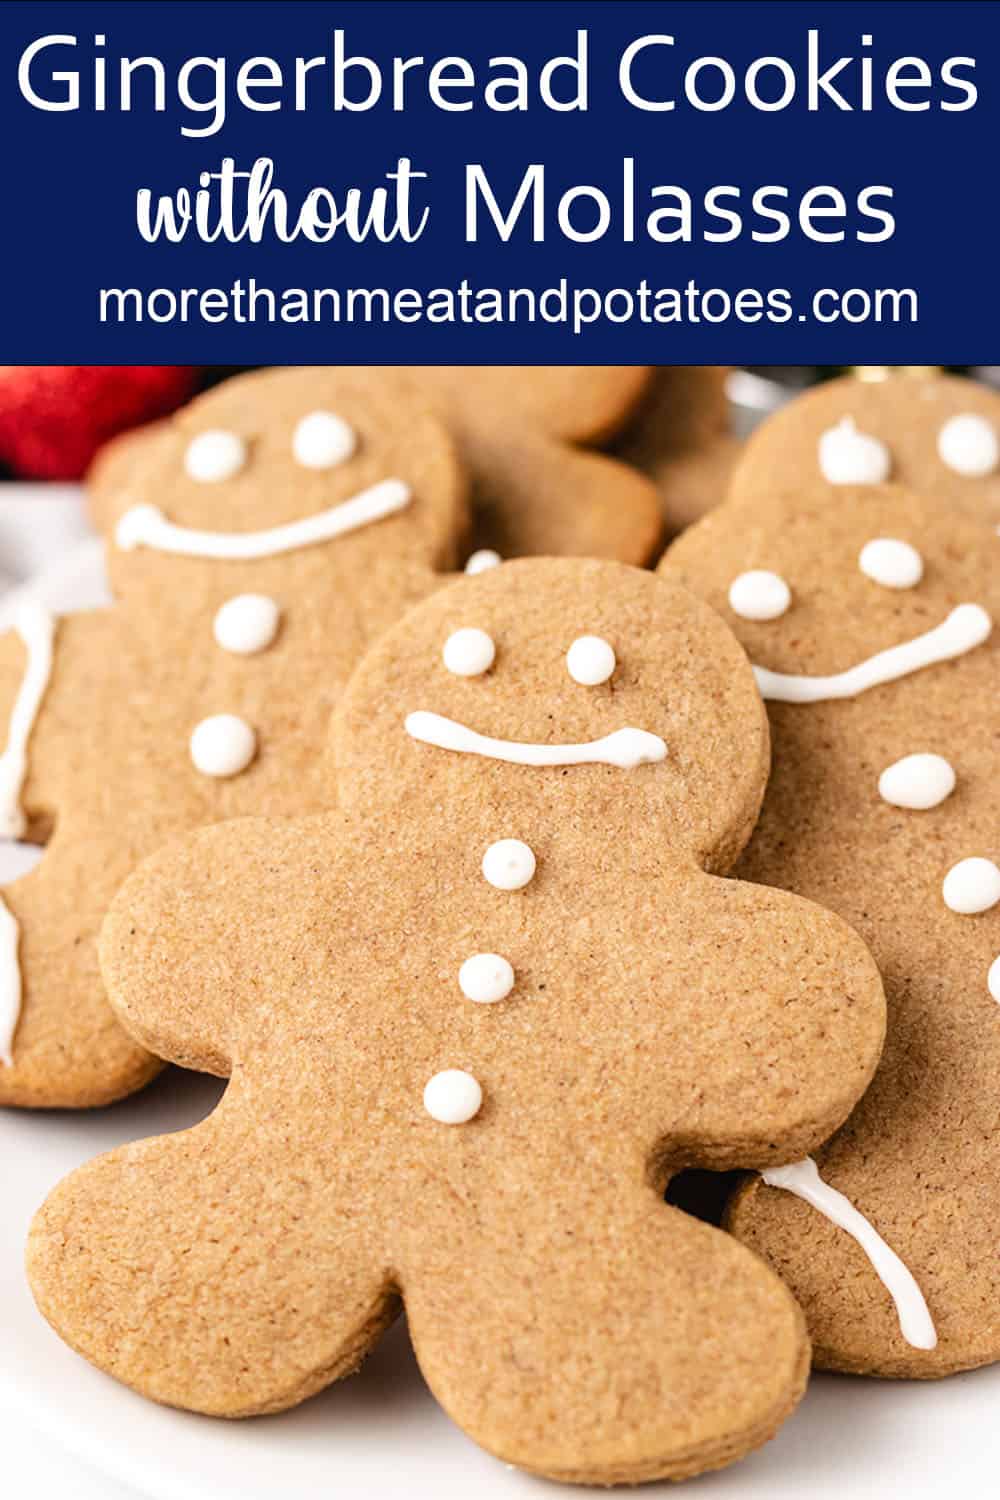 gingerbread-cookies-without-molasses-more-than-meat-and-potatoes